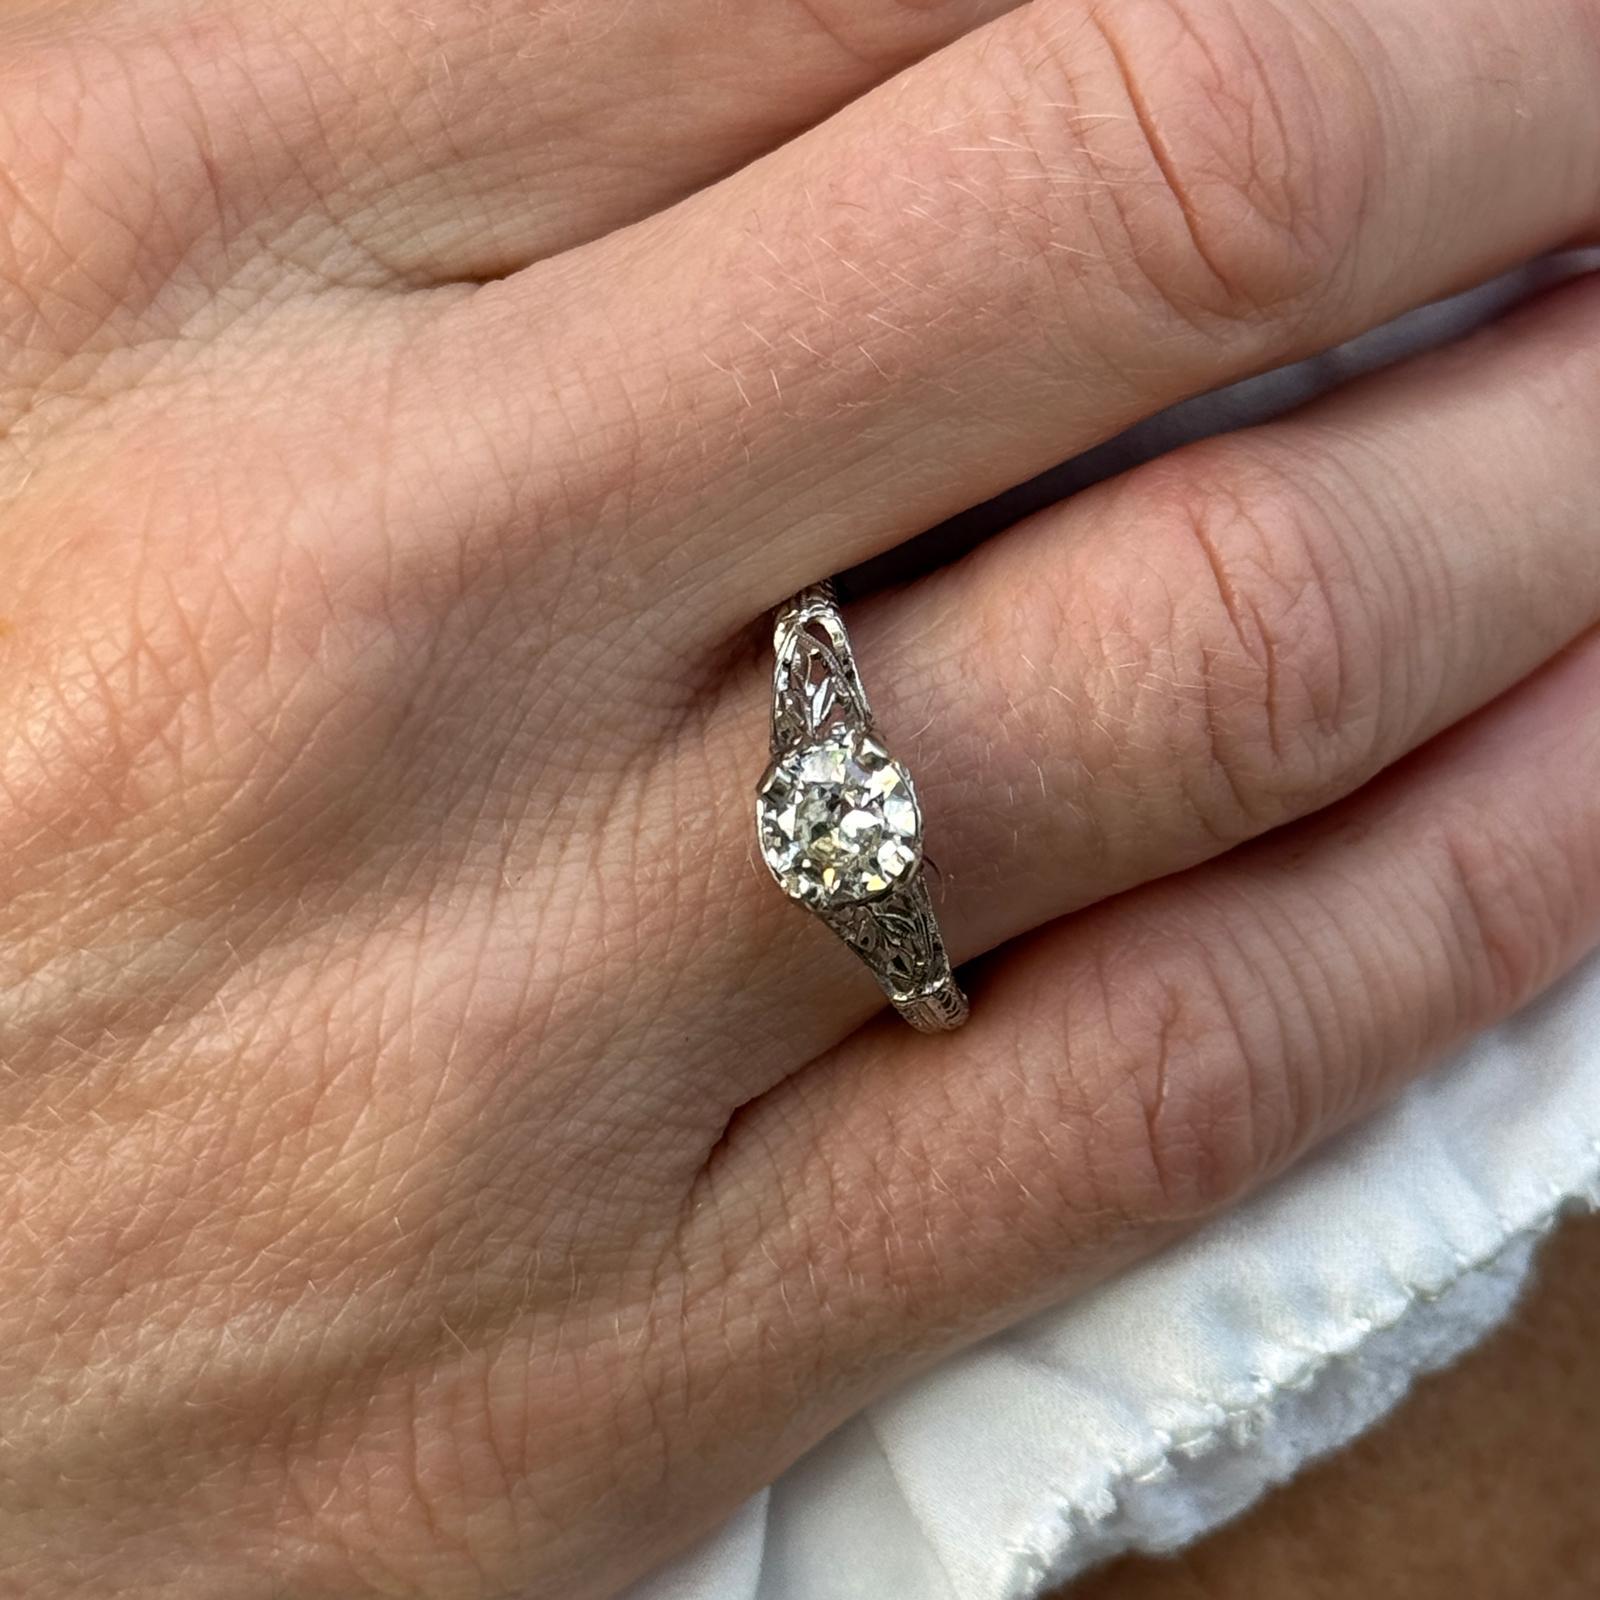 Original Art Deco diamond engagement ring handcrafted in 18 karat white gold. The ring features a .78 carat Old European cut diamond graded M color and VS clarity. The diamond is prong set in a filigree mounting measuring 7mm in width. The ring is